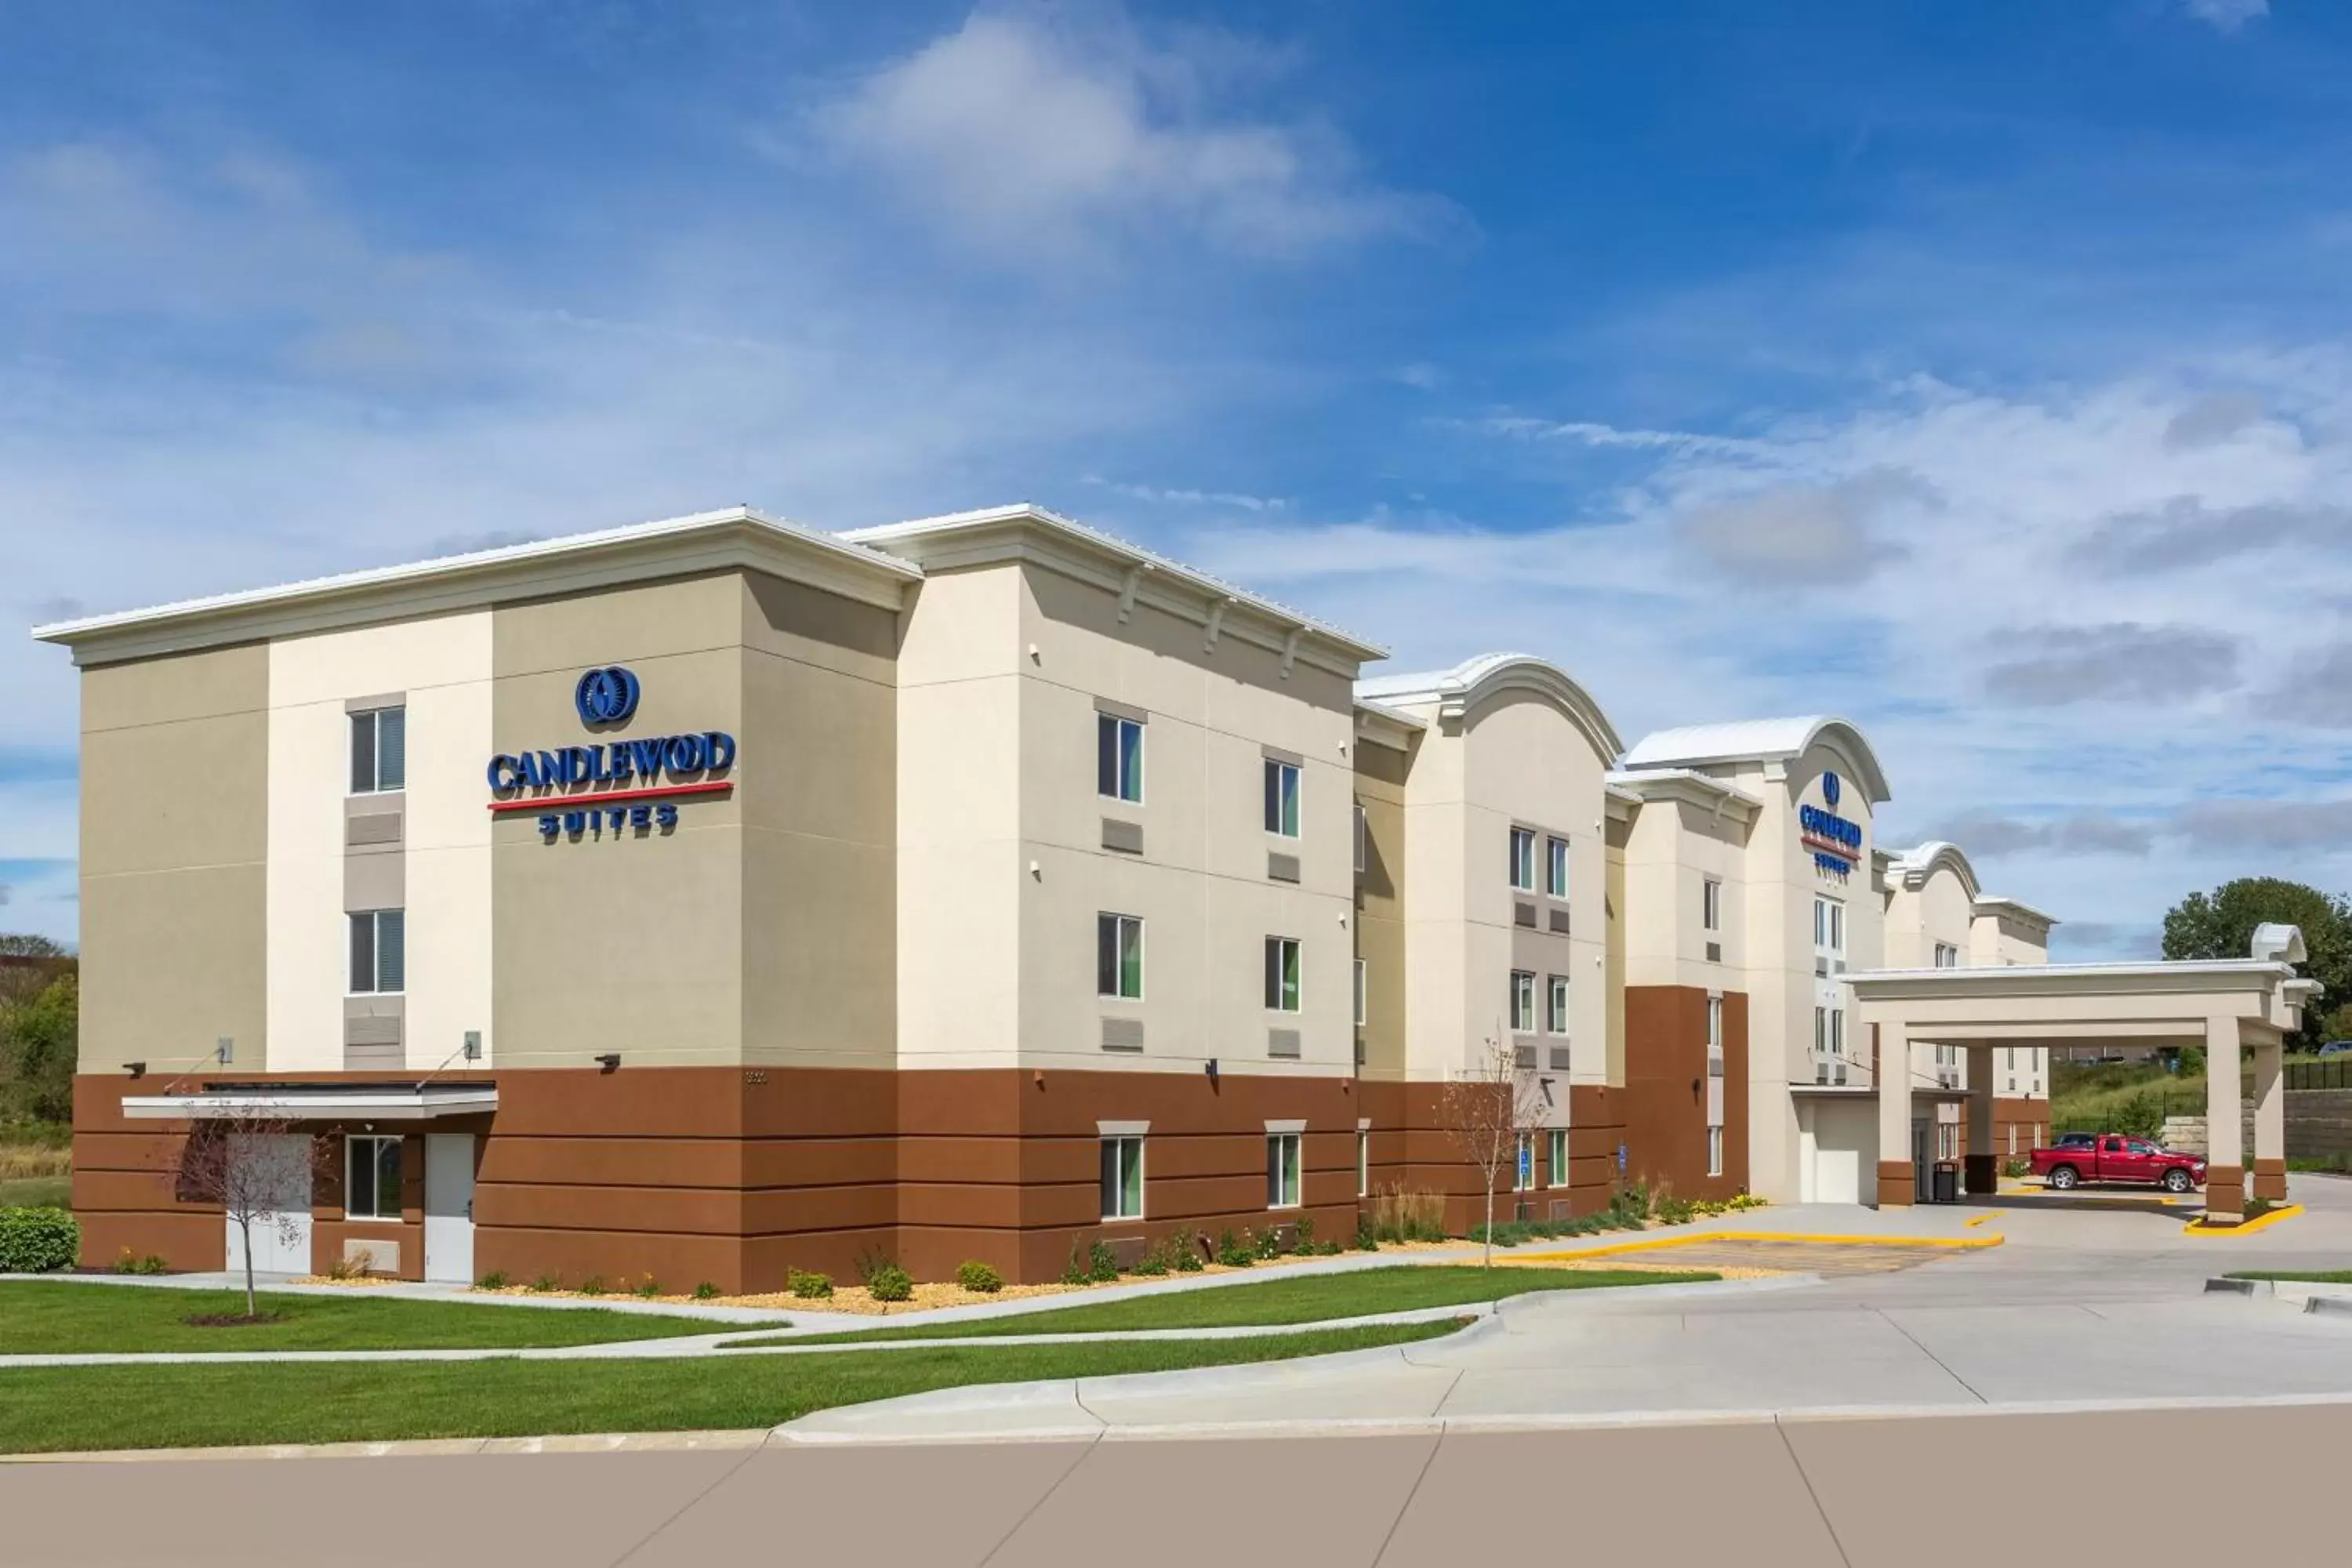 Property building in Candlewood Suites - Davenport, an IHG Hotel